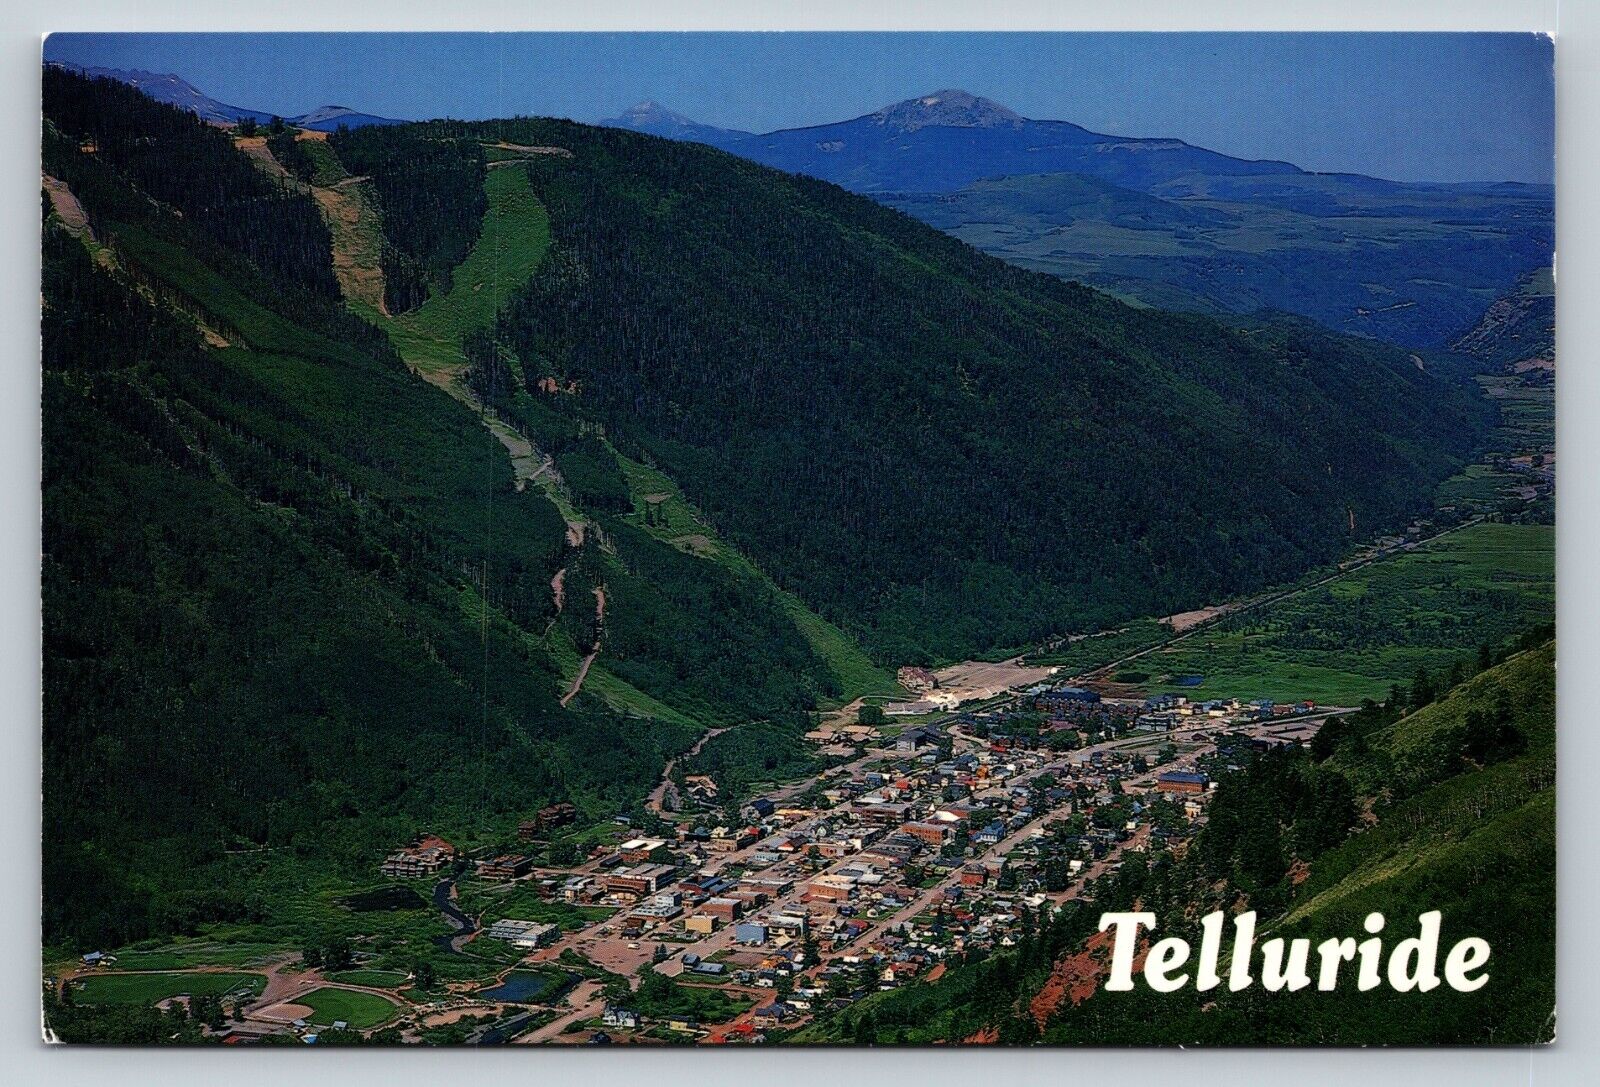 4x6 Telluride Colorado from Tomboy Mine Road Mountain Background Postcard 1758